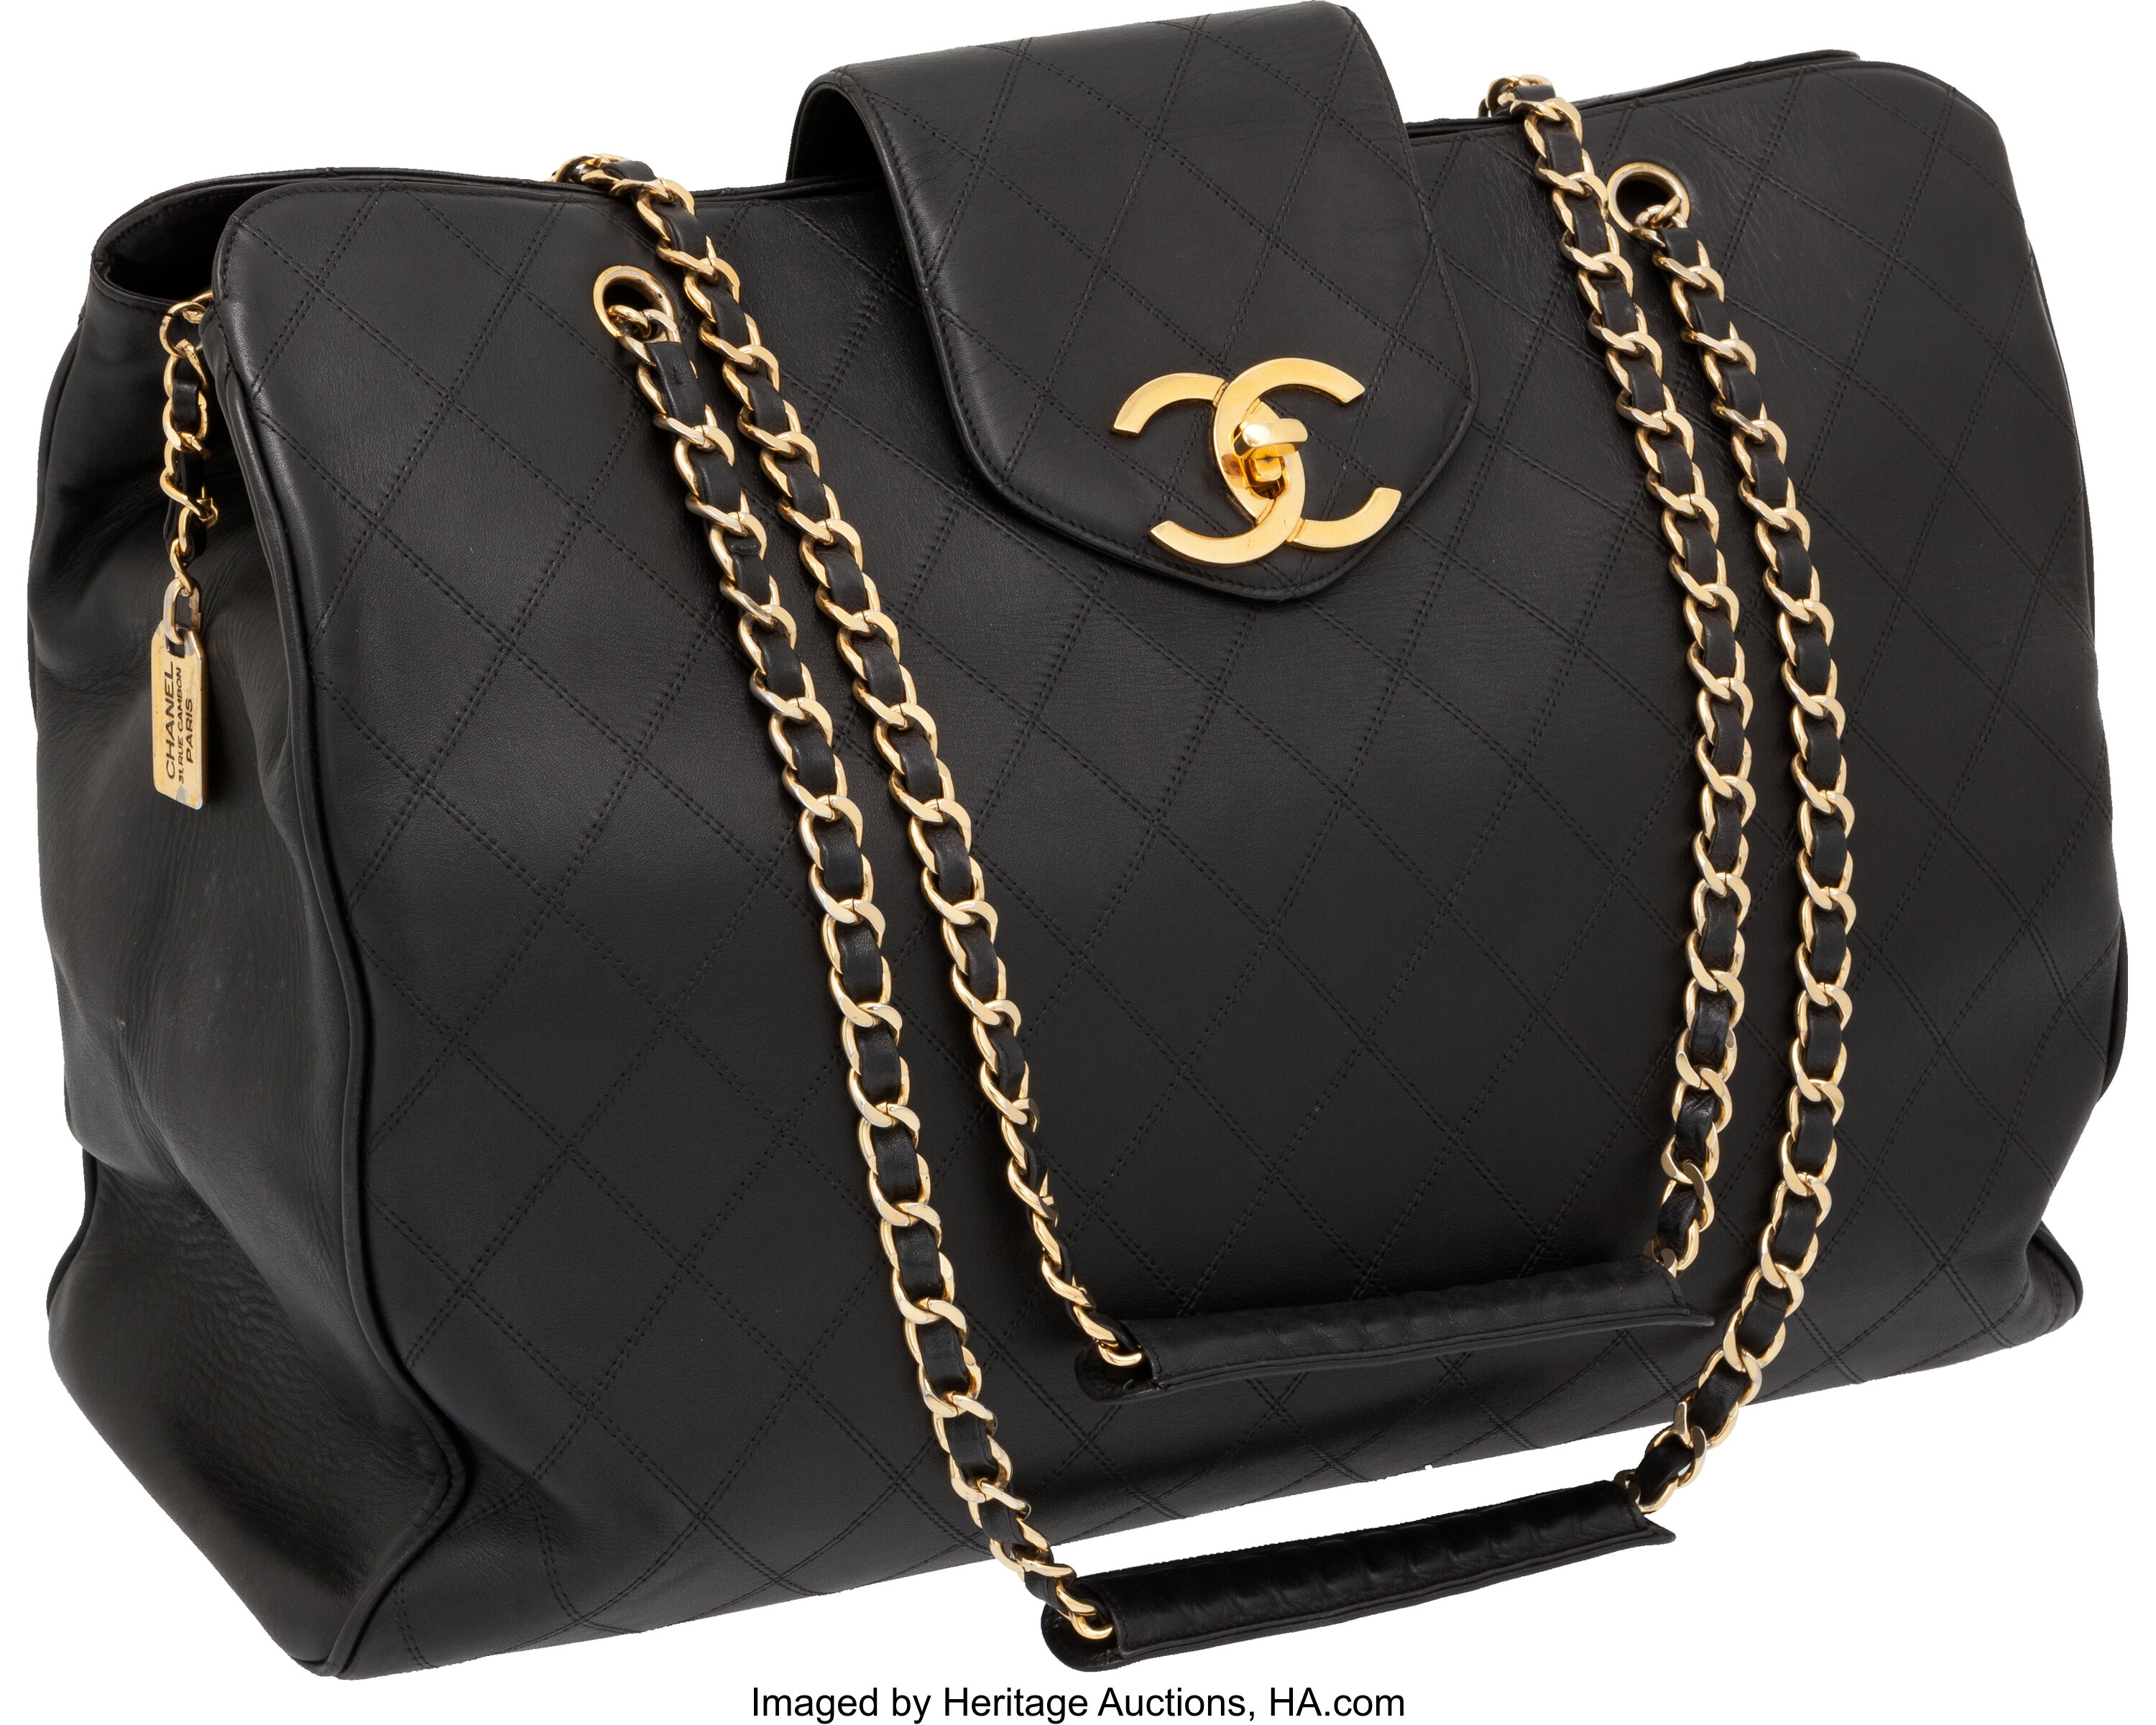 Chanel Black Lambskin Leather Supermodel Jumbo Tote with Gold